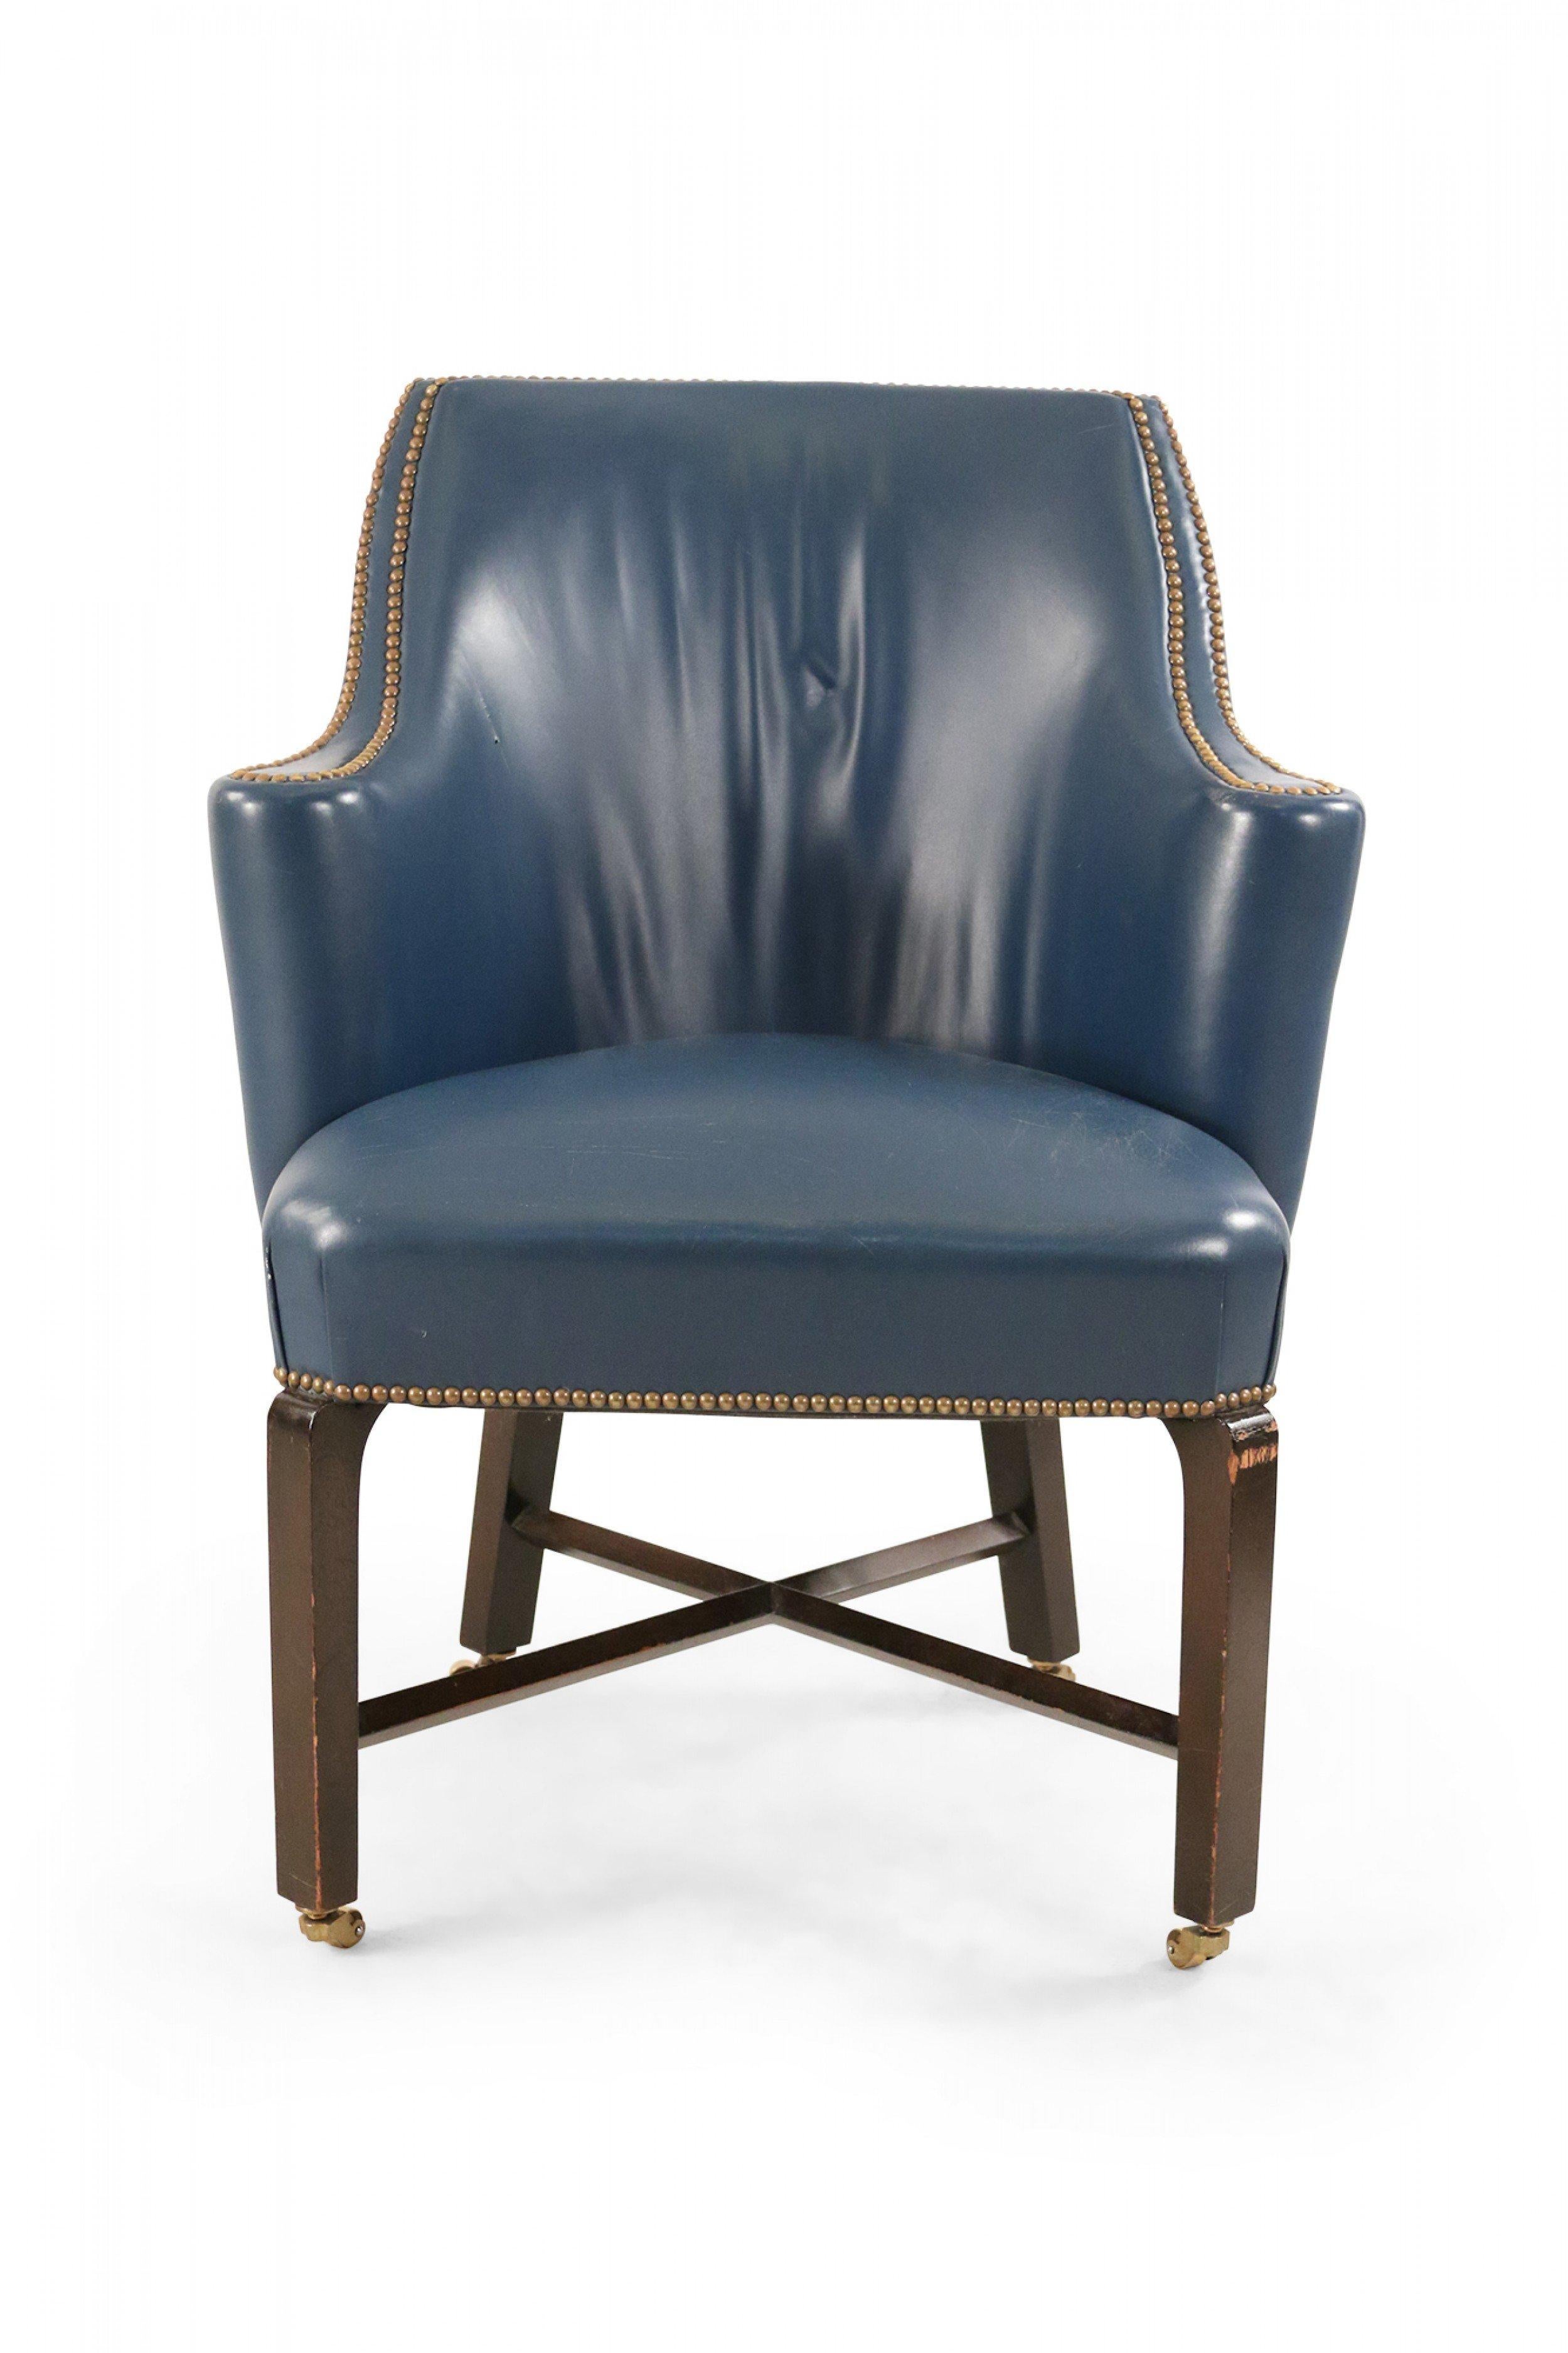 Contemporary blue leather club / armchair with a rounded back, black painted wooden legs on small casters with an x-shaped stretcher, and brass upholstery nail detail.